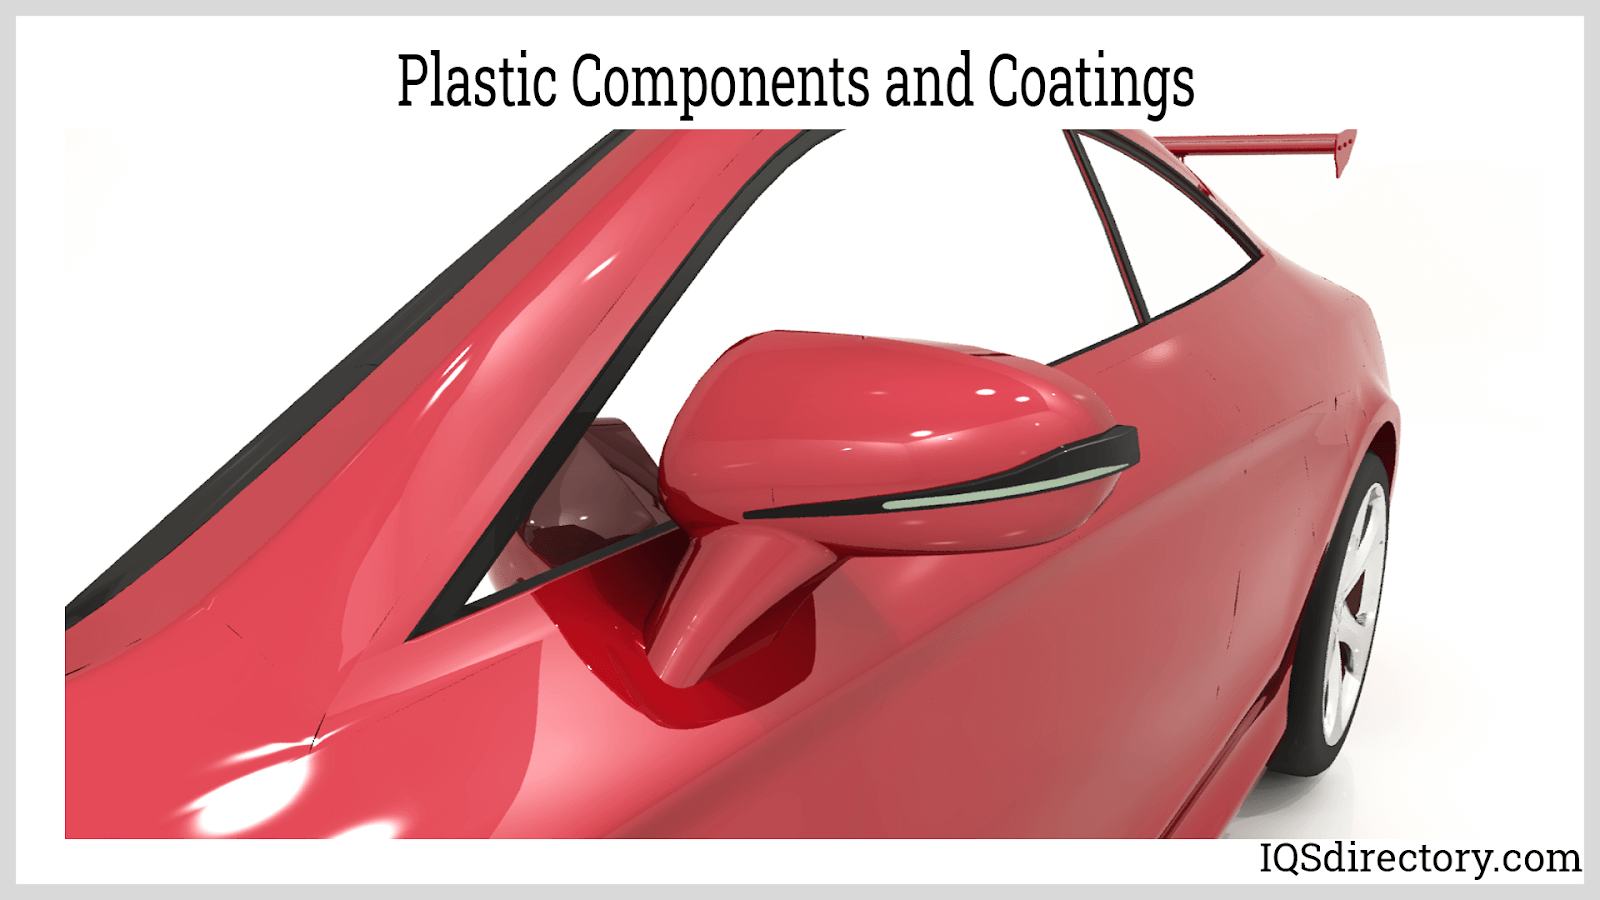 Plastic Components and Coatings